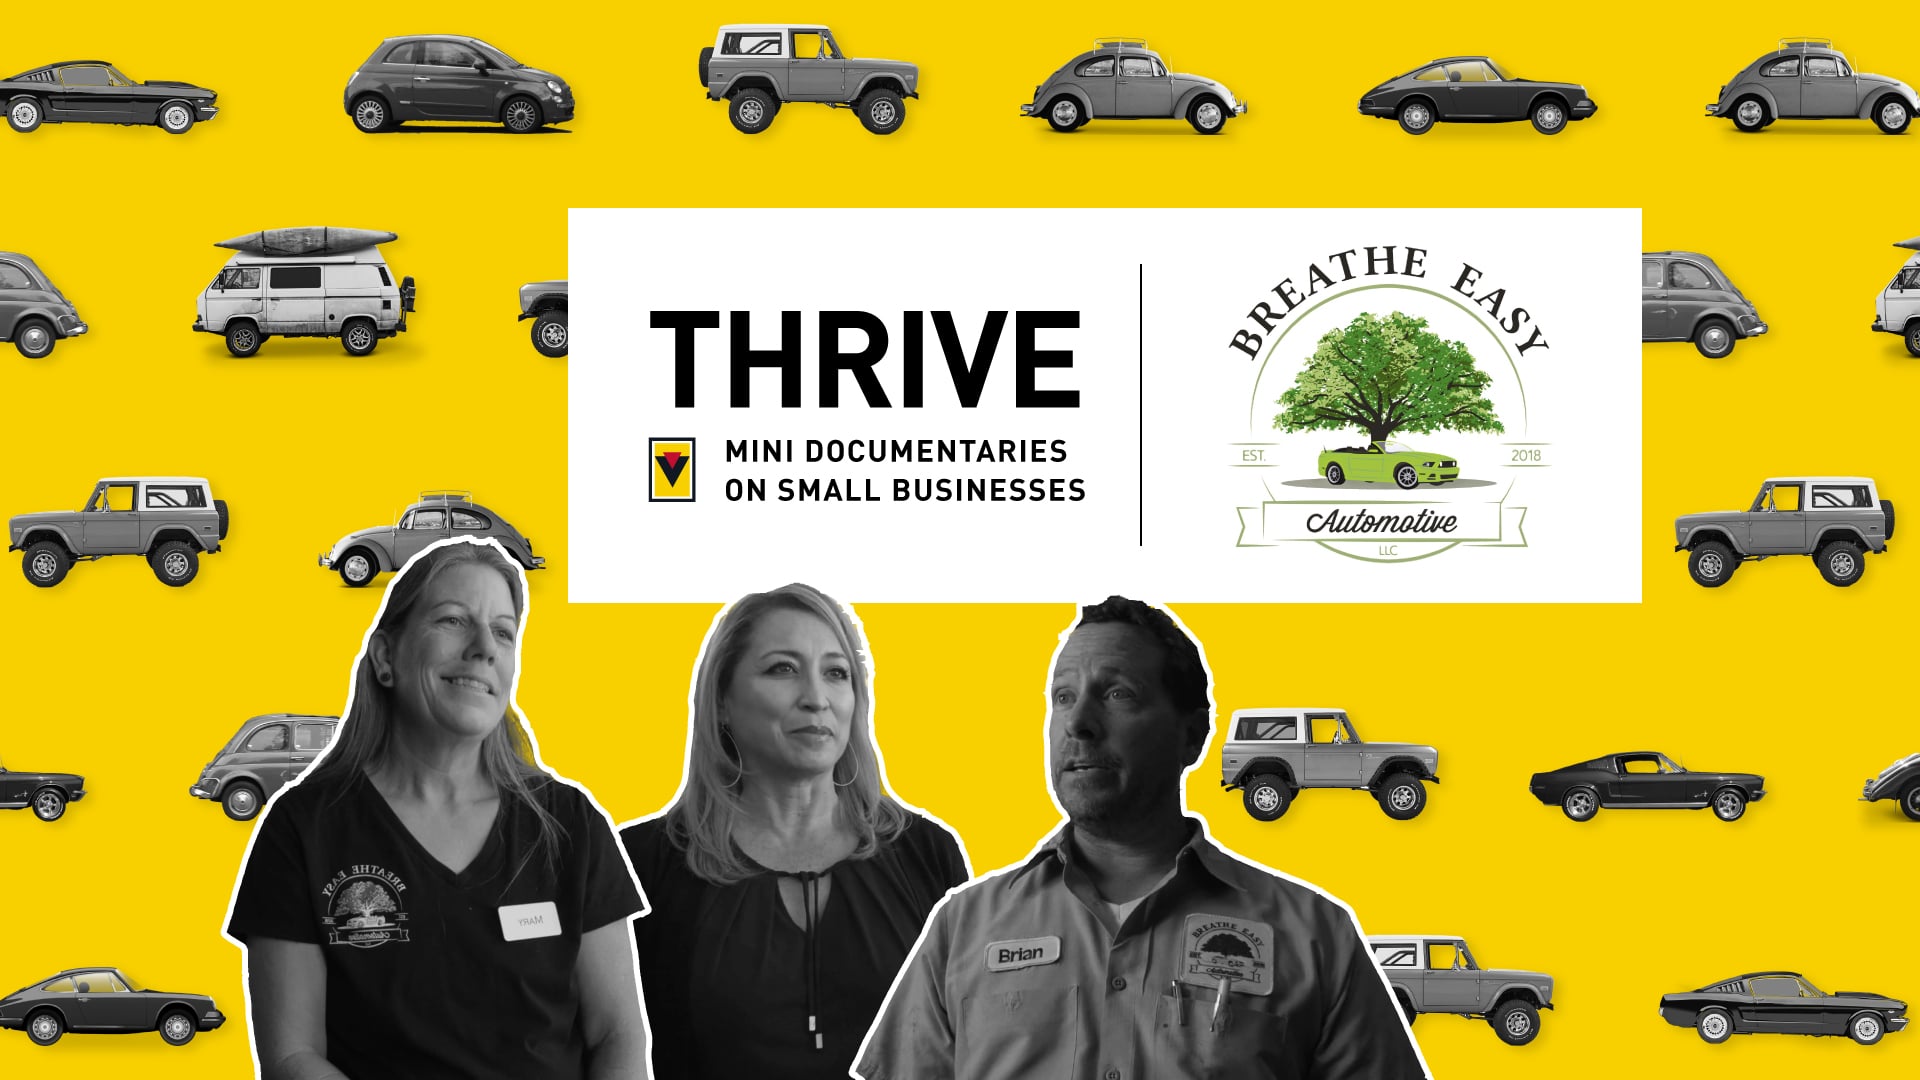 Building Trust In Our Community: The Breathe Easy Automotive Story